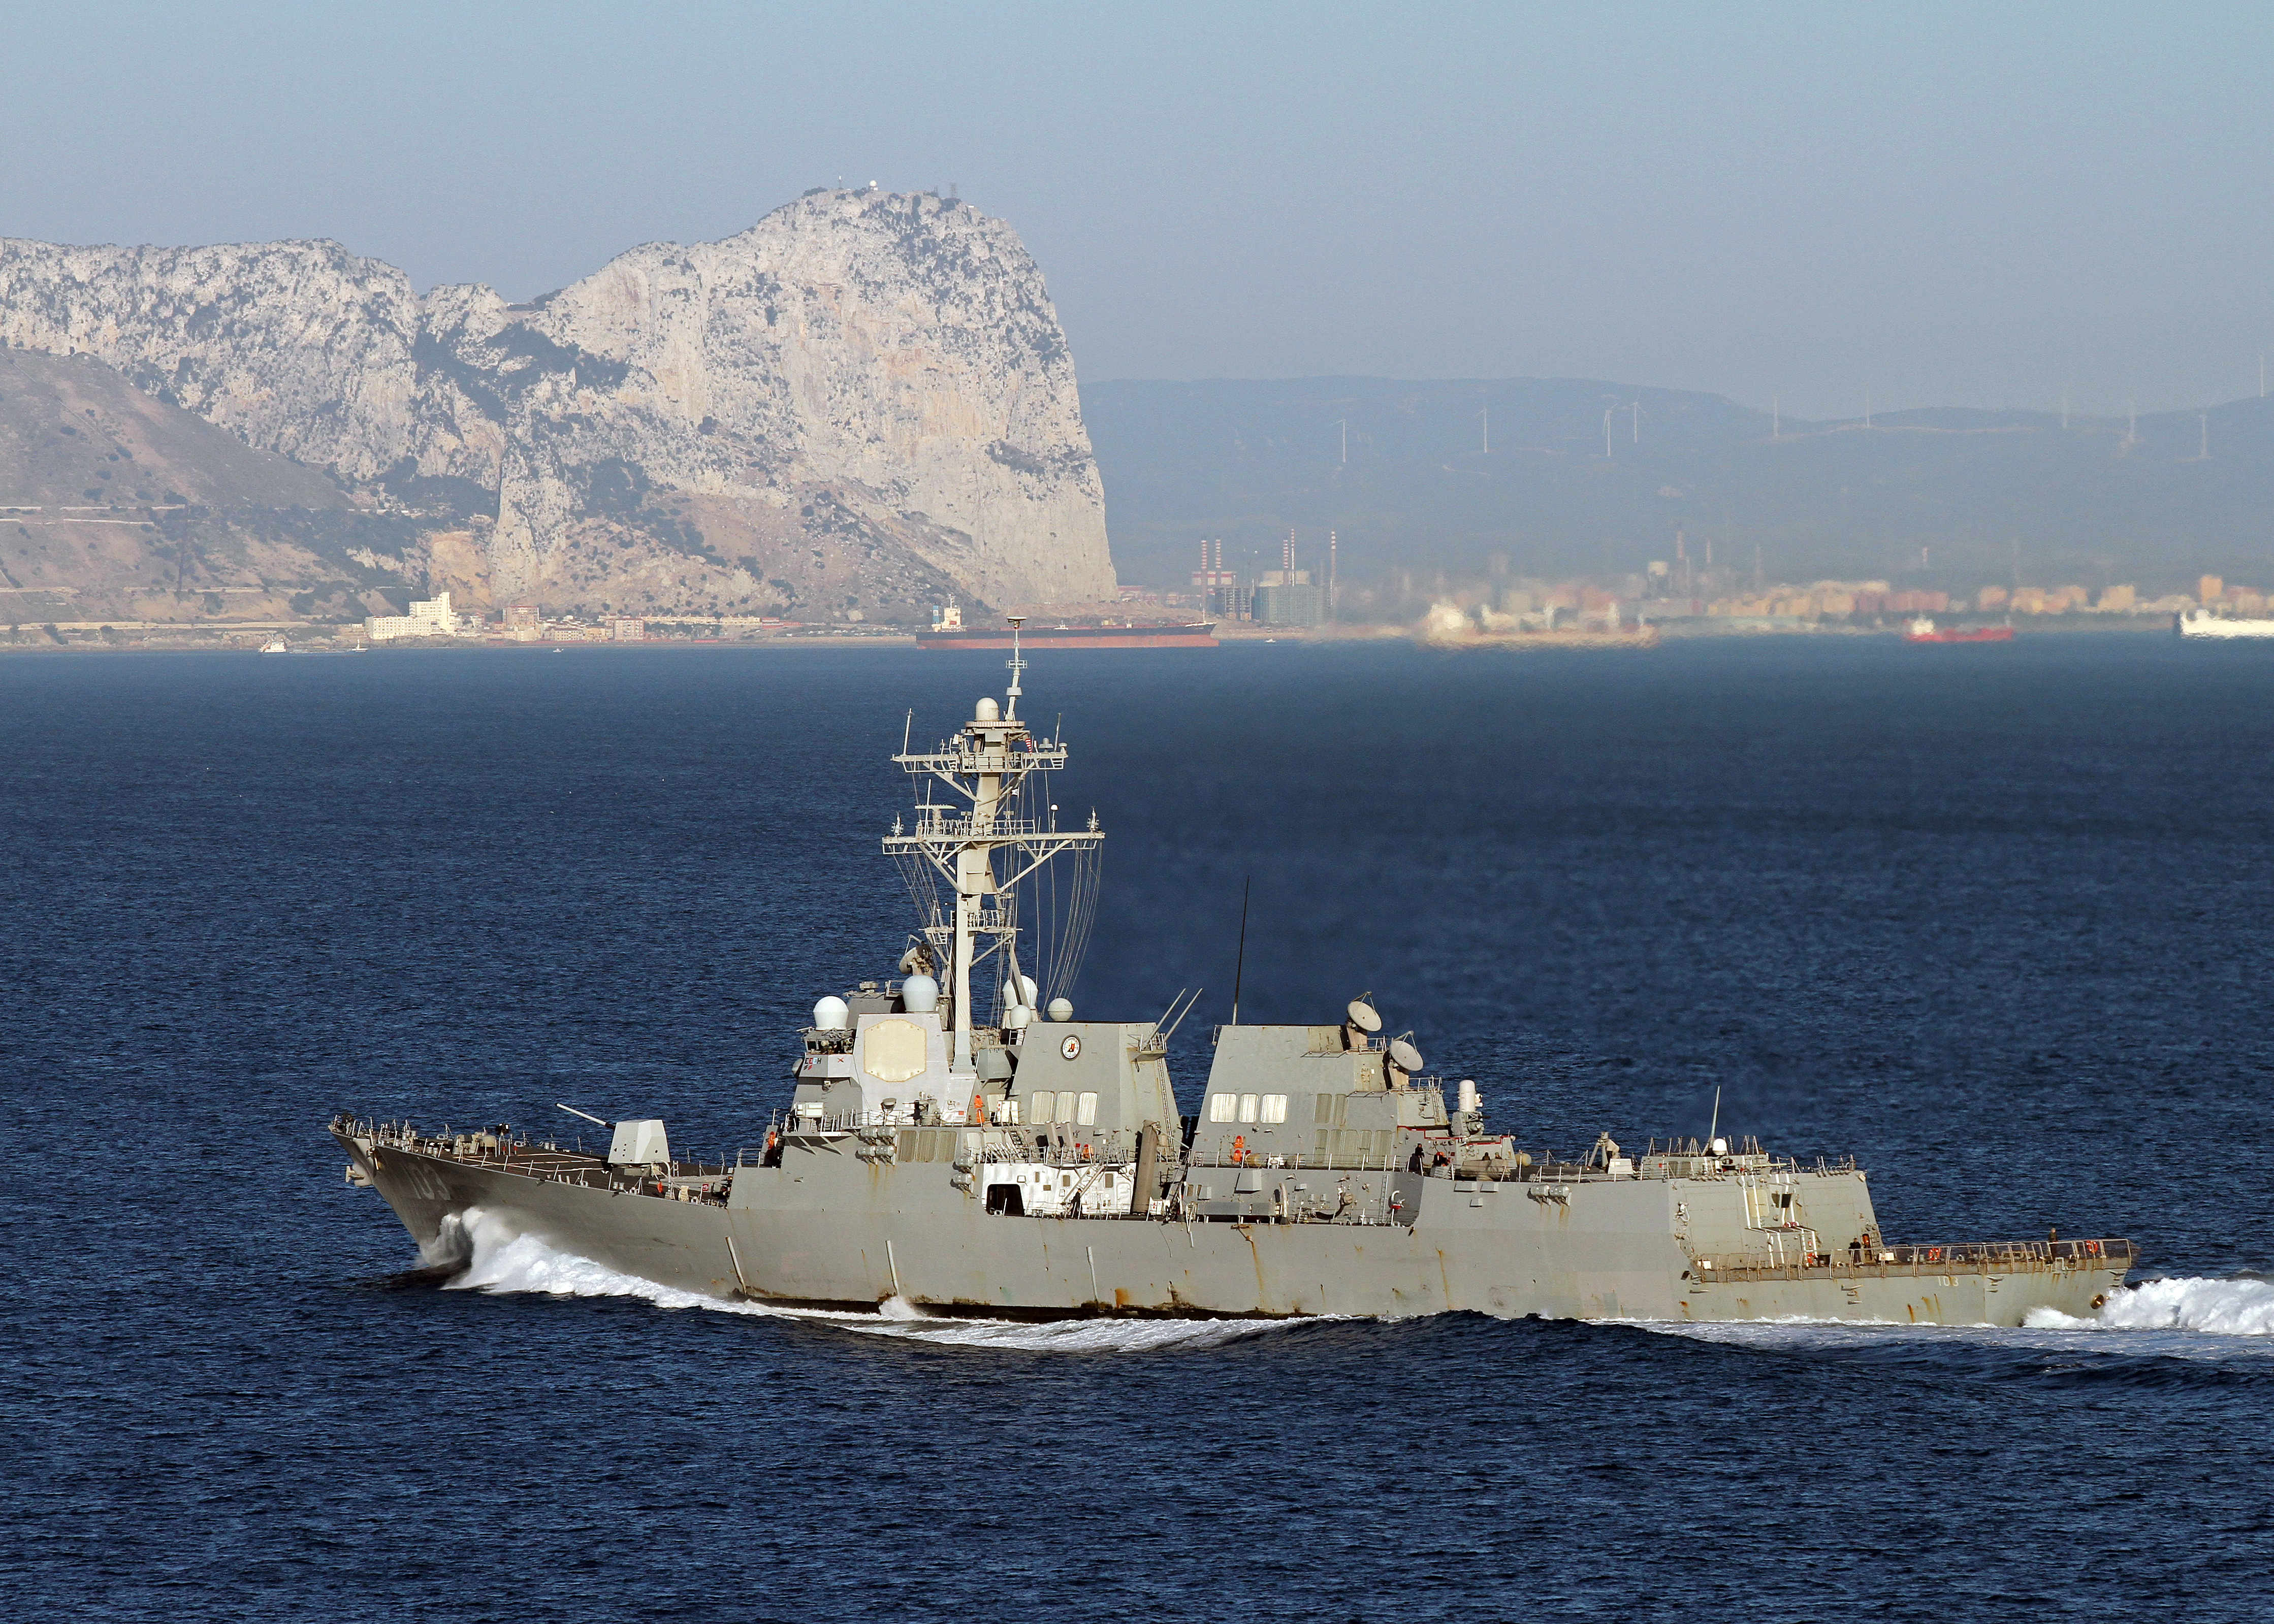 Guided-missile destroyer USS Truxtun (DDG-103) transits the Strait of Gibraltar in 2014. US Navy Photo